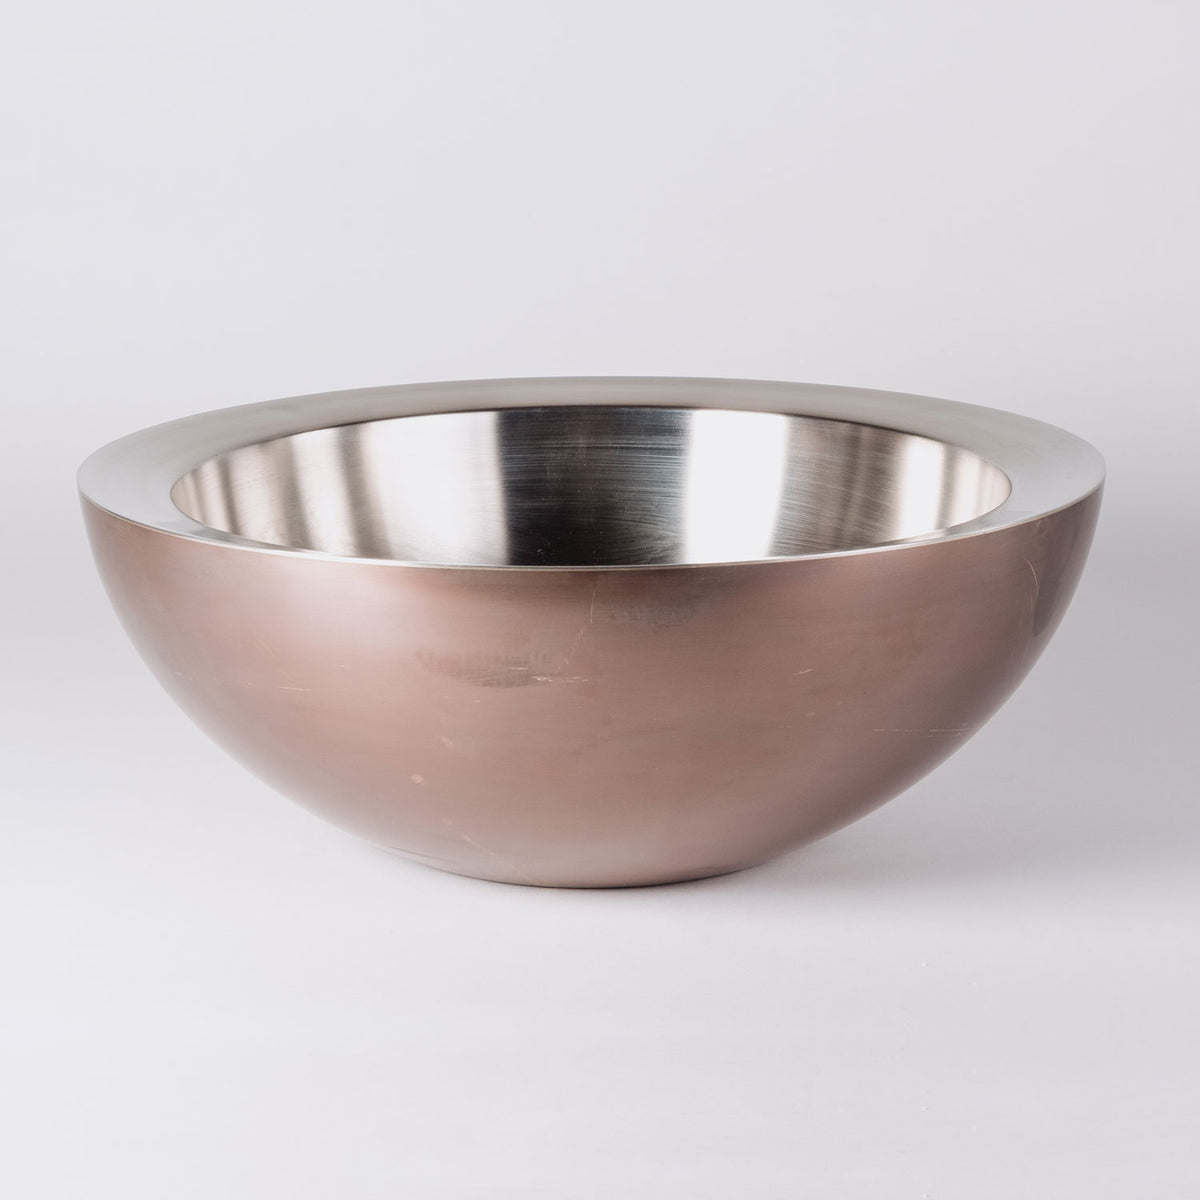 Round Copper/ Stainless Vessel Sink image 1 of 4